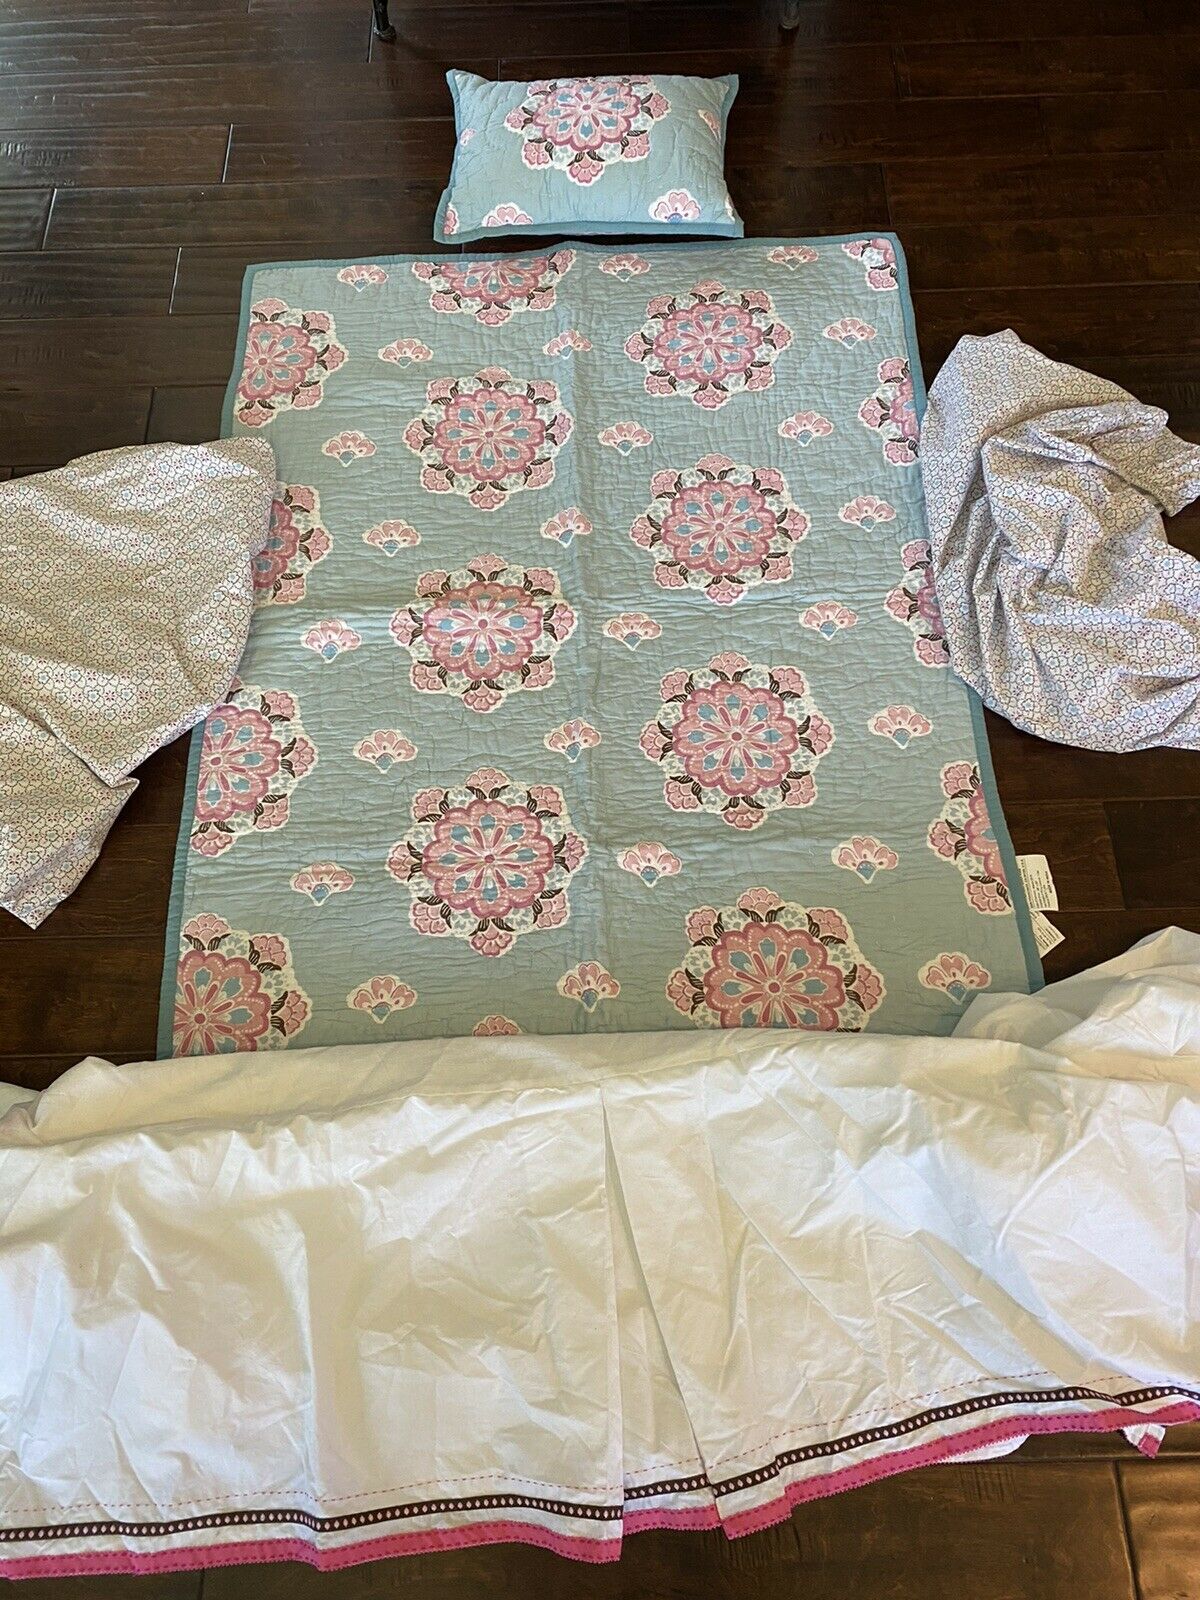 Pottery Barn Kids Crib Quilt Pillow And Sham 2 Sheets Crib Skirt Pink Floral